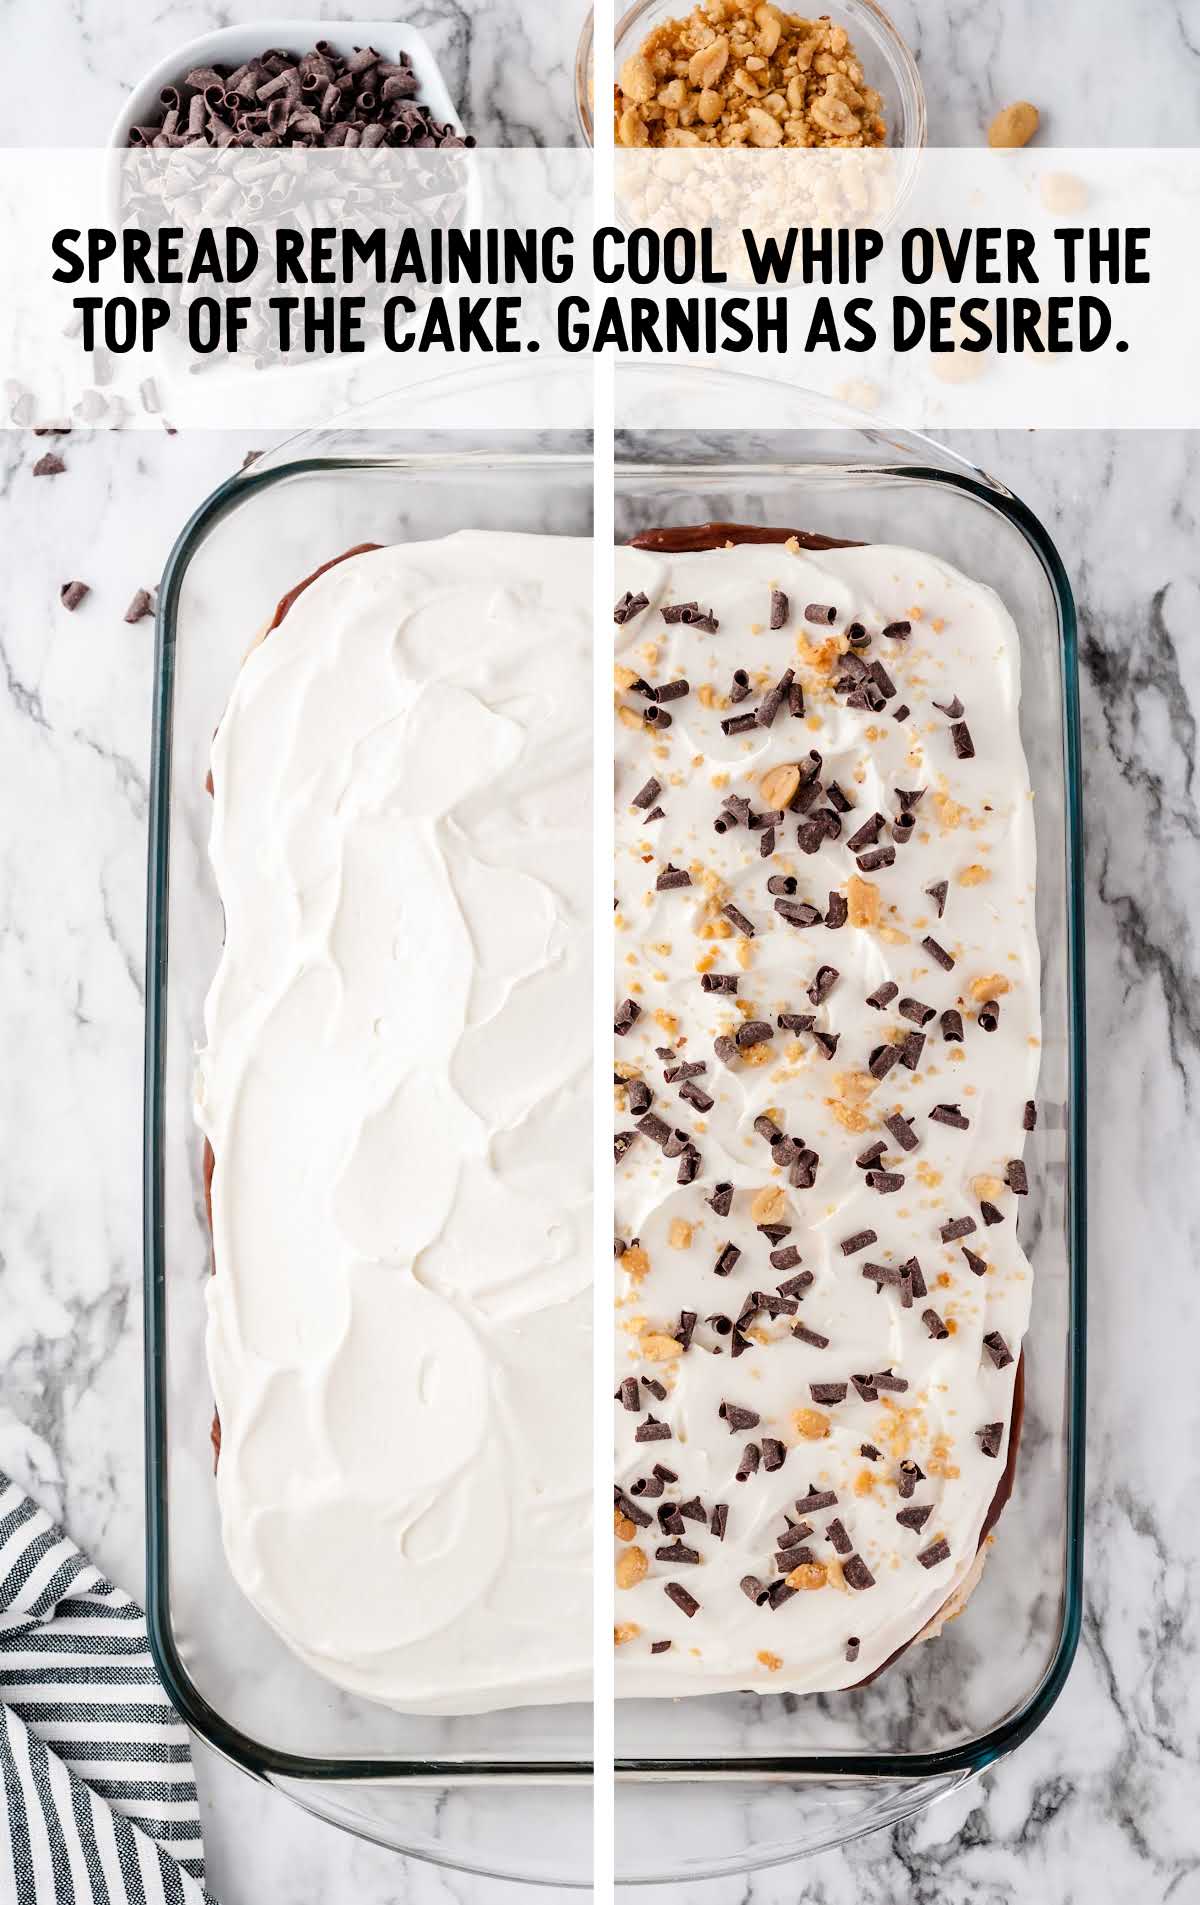 cool whip spread over the cake and garnished with peanuts and chocolate shavings